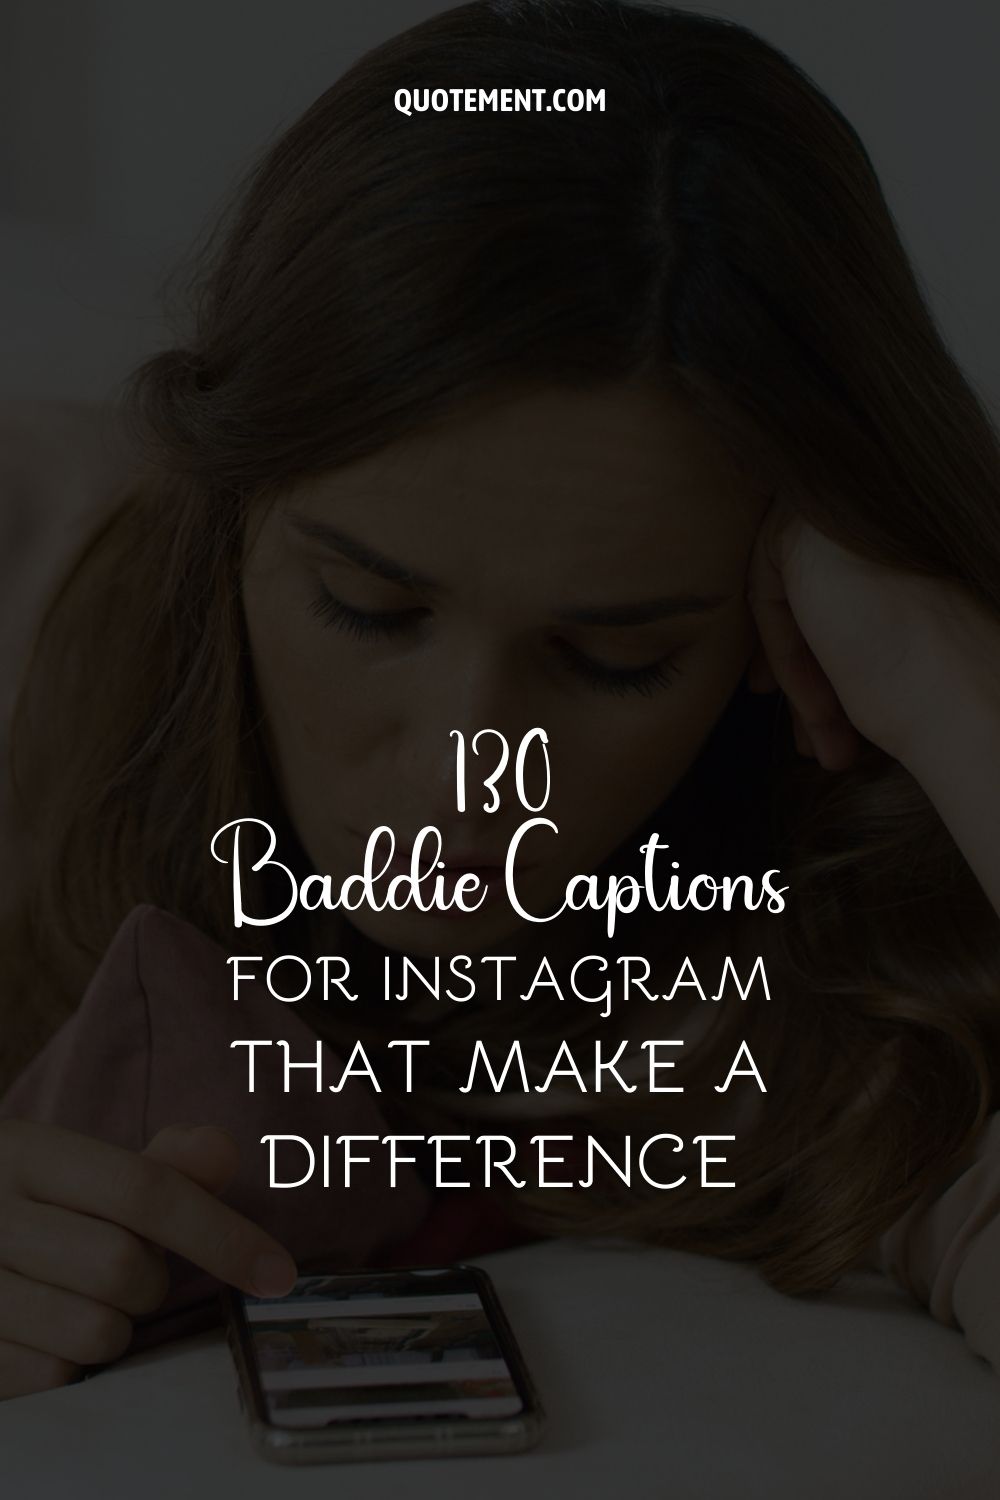 130 Baddie Captions For Instagram That Make A Difference
